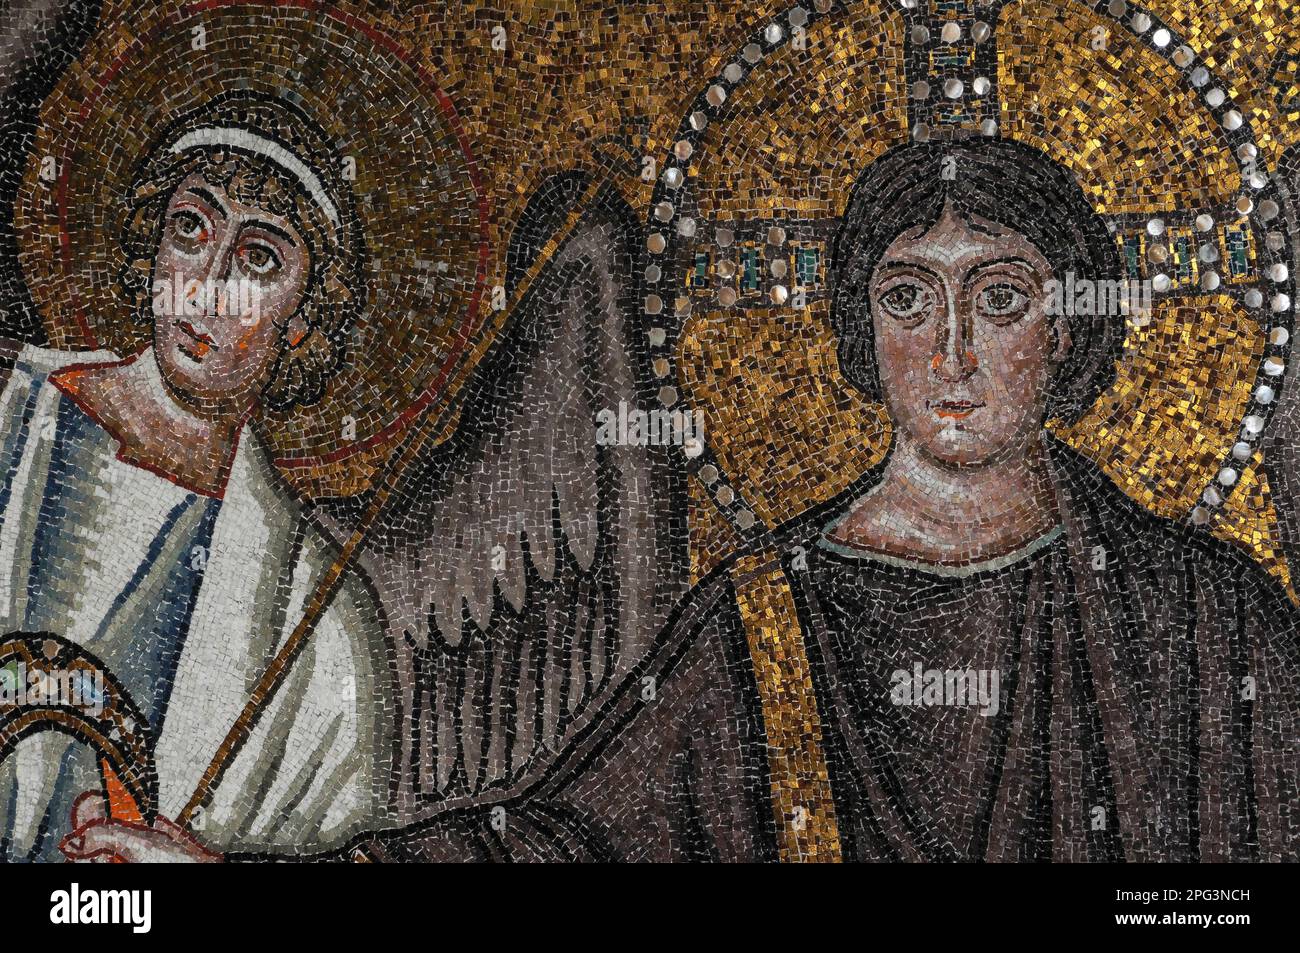 Christ the Redeemer, depicted as young, beardless and flanked by an archangel against a background of golden tesserae and inlaid mother of pearl: 6th century AD Byzantine mosaic in the apse dome of the Basilica di San Vitale, founded in 547 AD at Ravenna, Emilia Romagna, Italy. Stock Photo